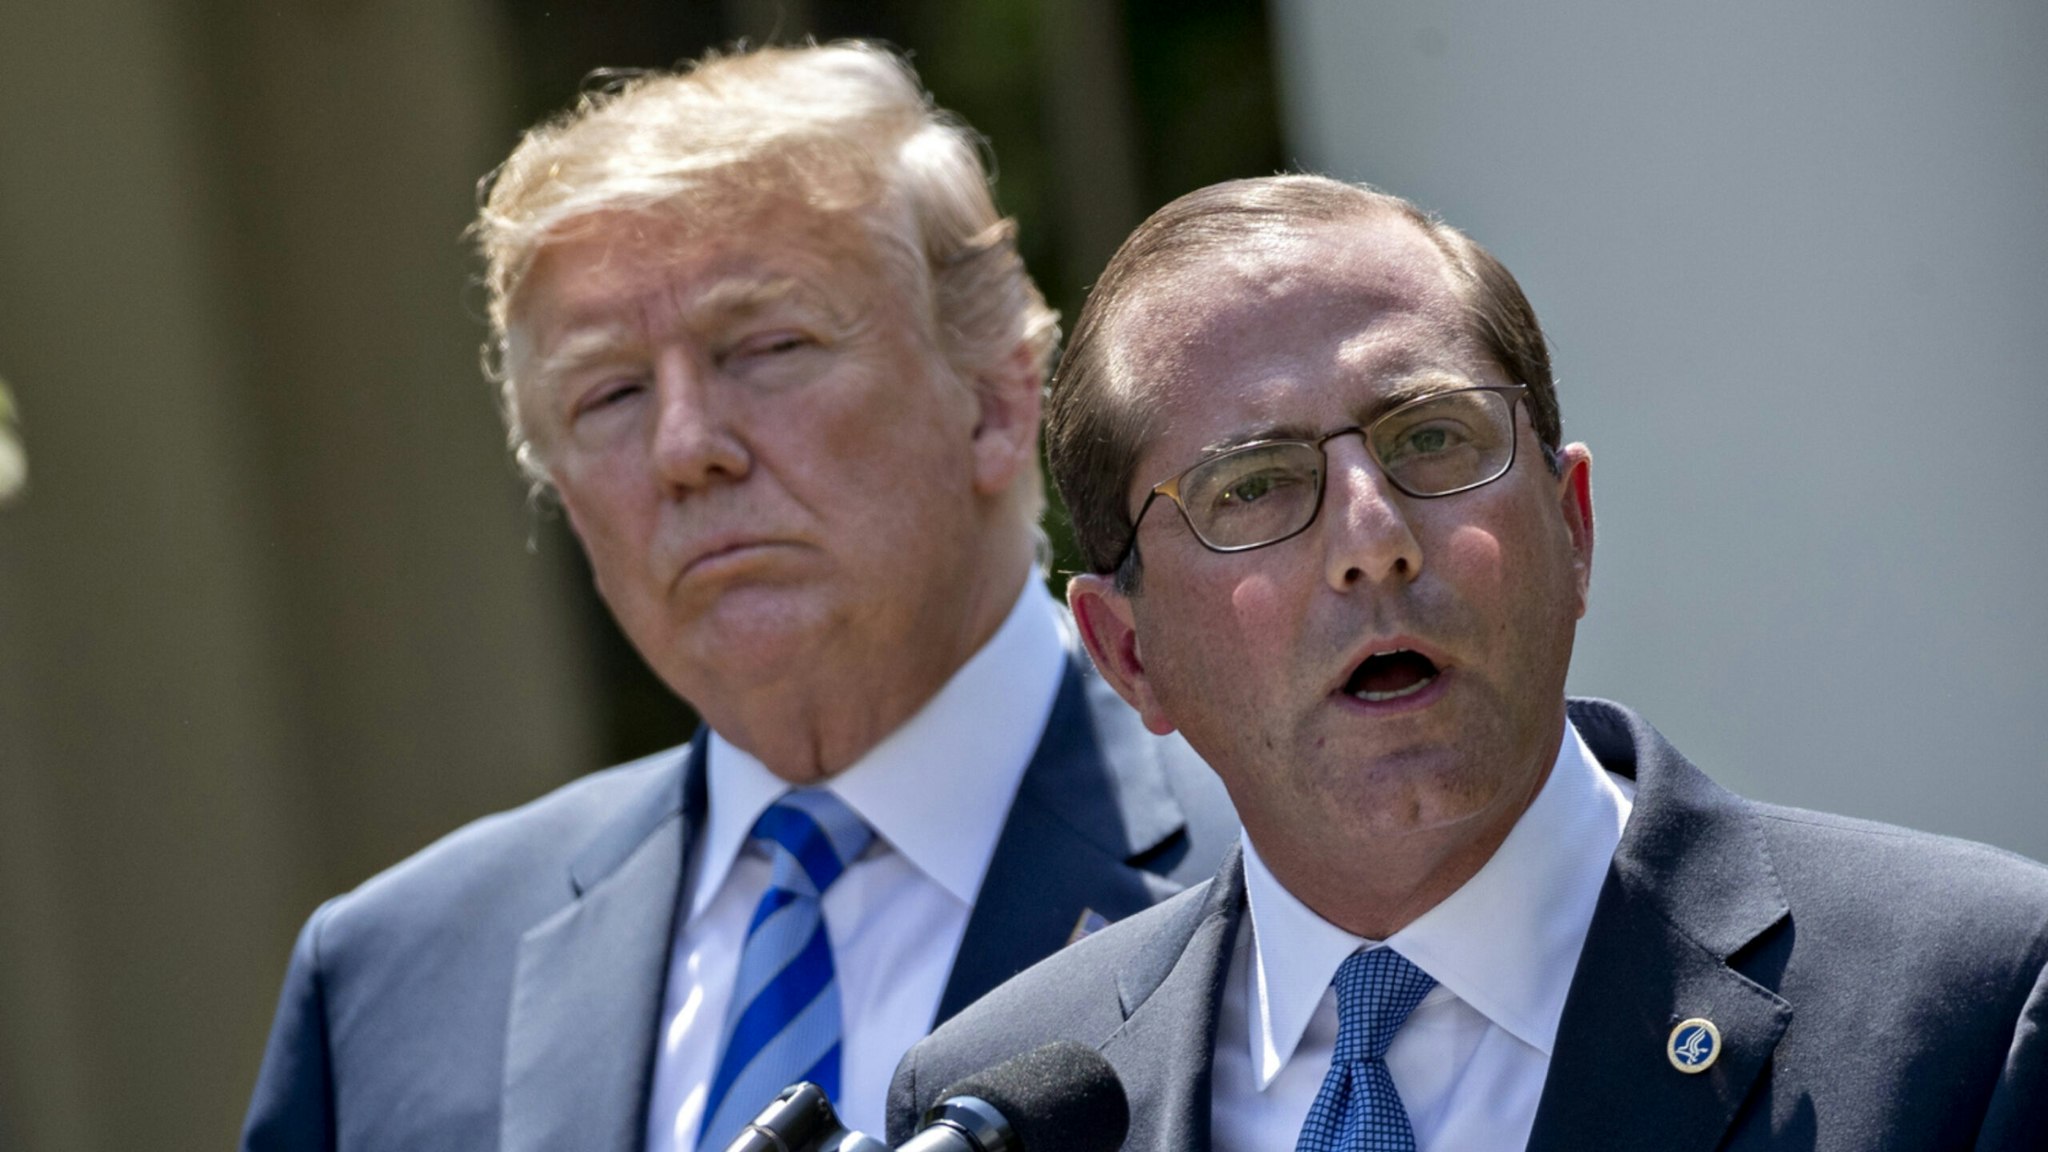 Alex Azar, secretary of Health and Human Services (HHS), right, speaks as U.S. President Donald Trump listens during an event on lowering drug prices in the Rose Garden of the White House in Washington, D.C., U.S., on Friday, May 11, 2018.